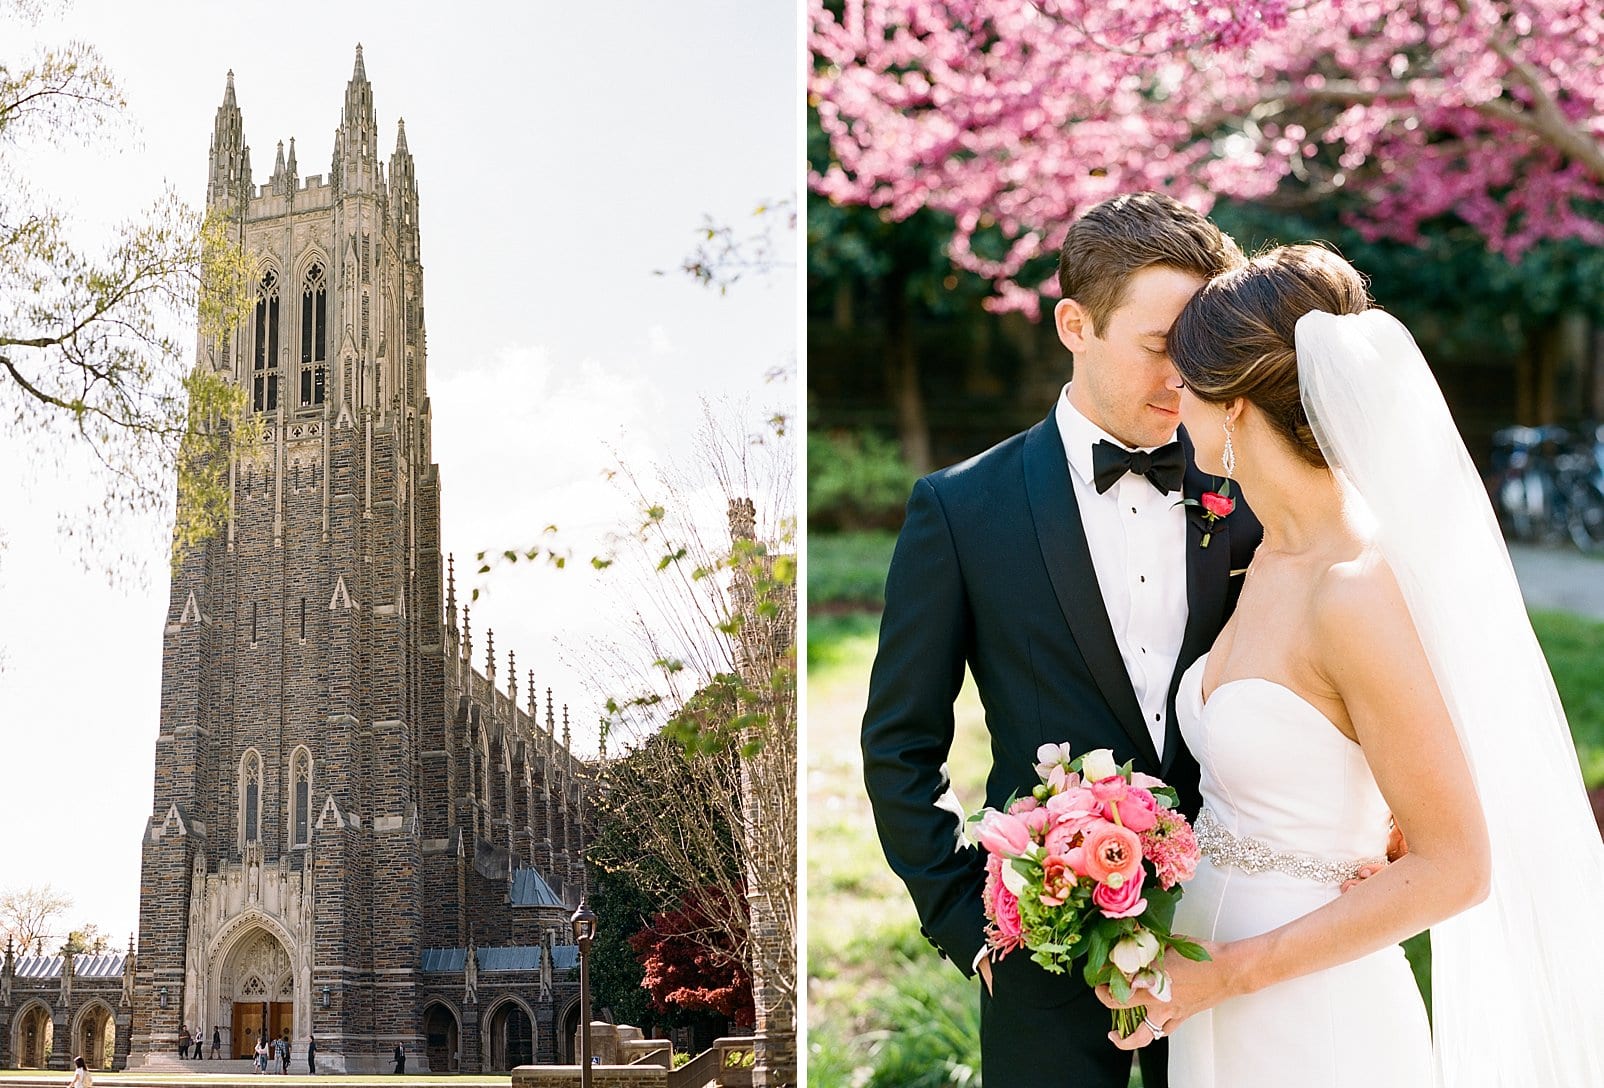 Duke Chapel photo down the side of the chapel and bride and groom snuggled together in front of spring tree blossoms photo